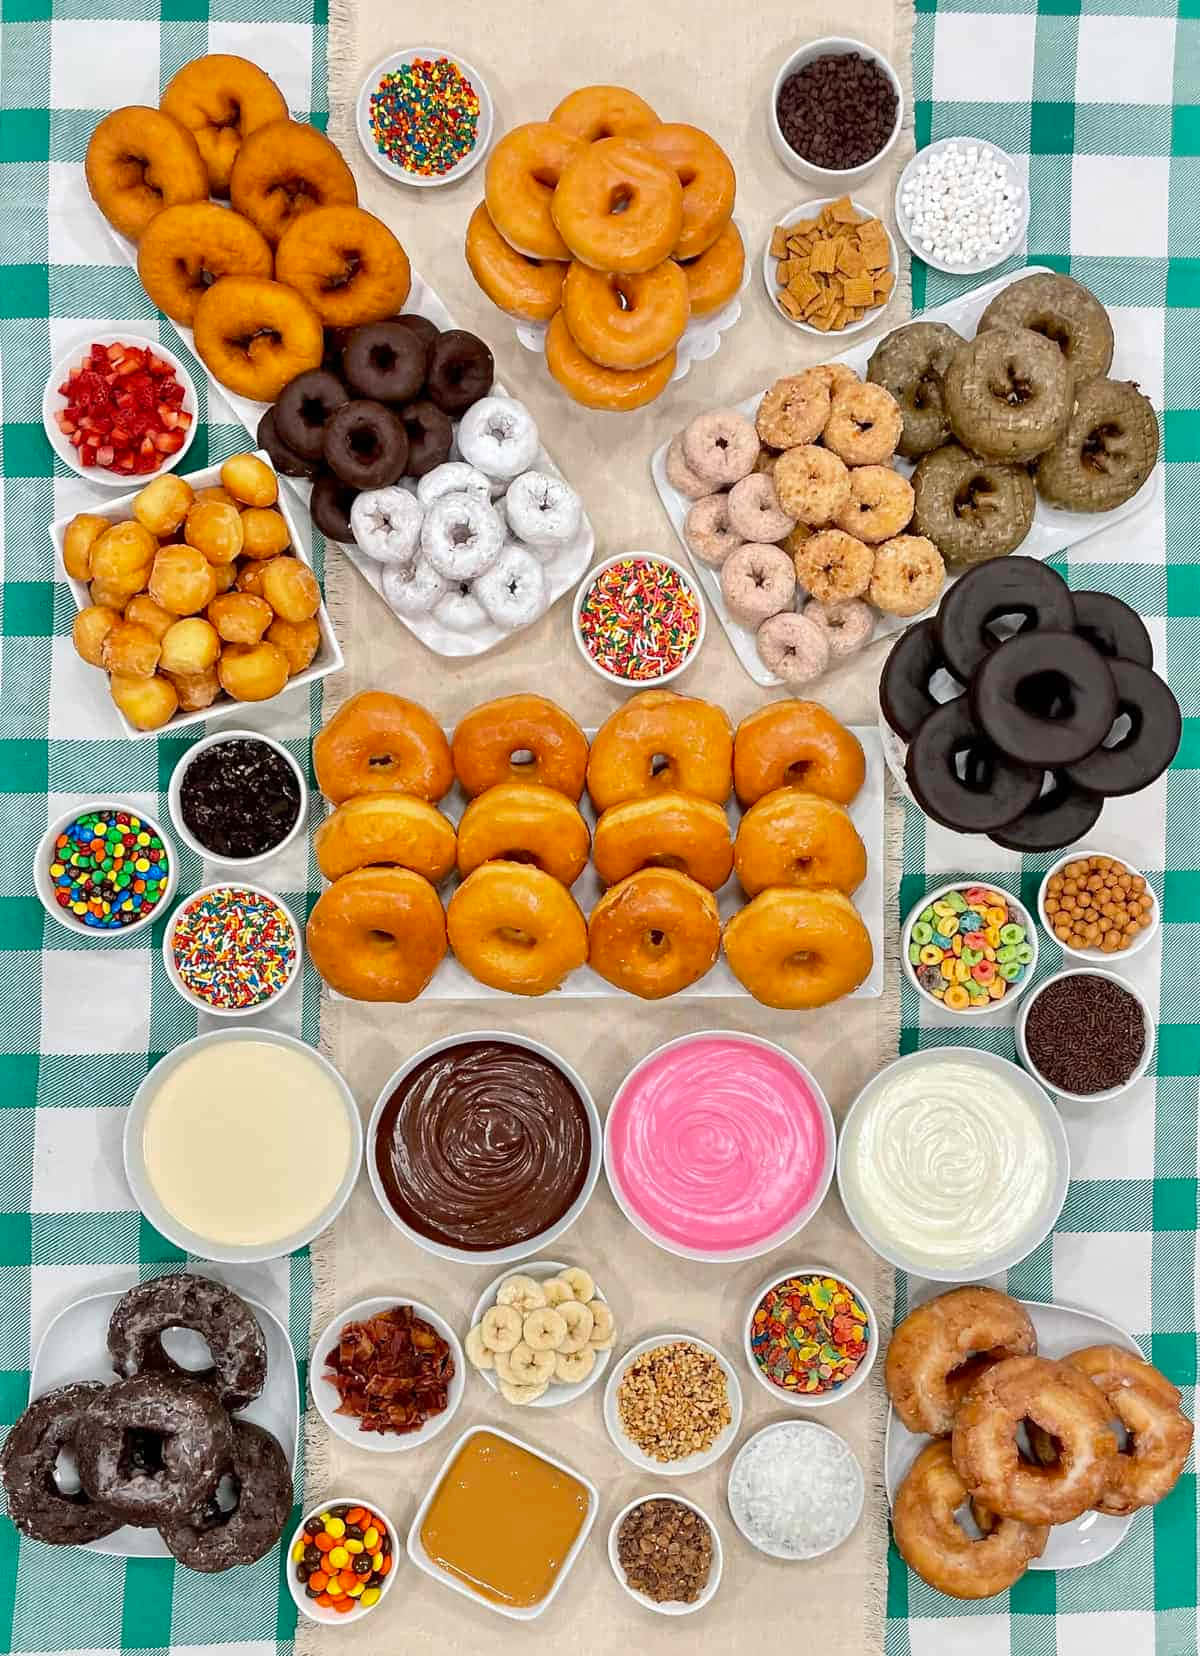 Delicious looking donuts, made to perfection.